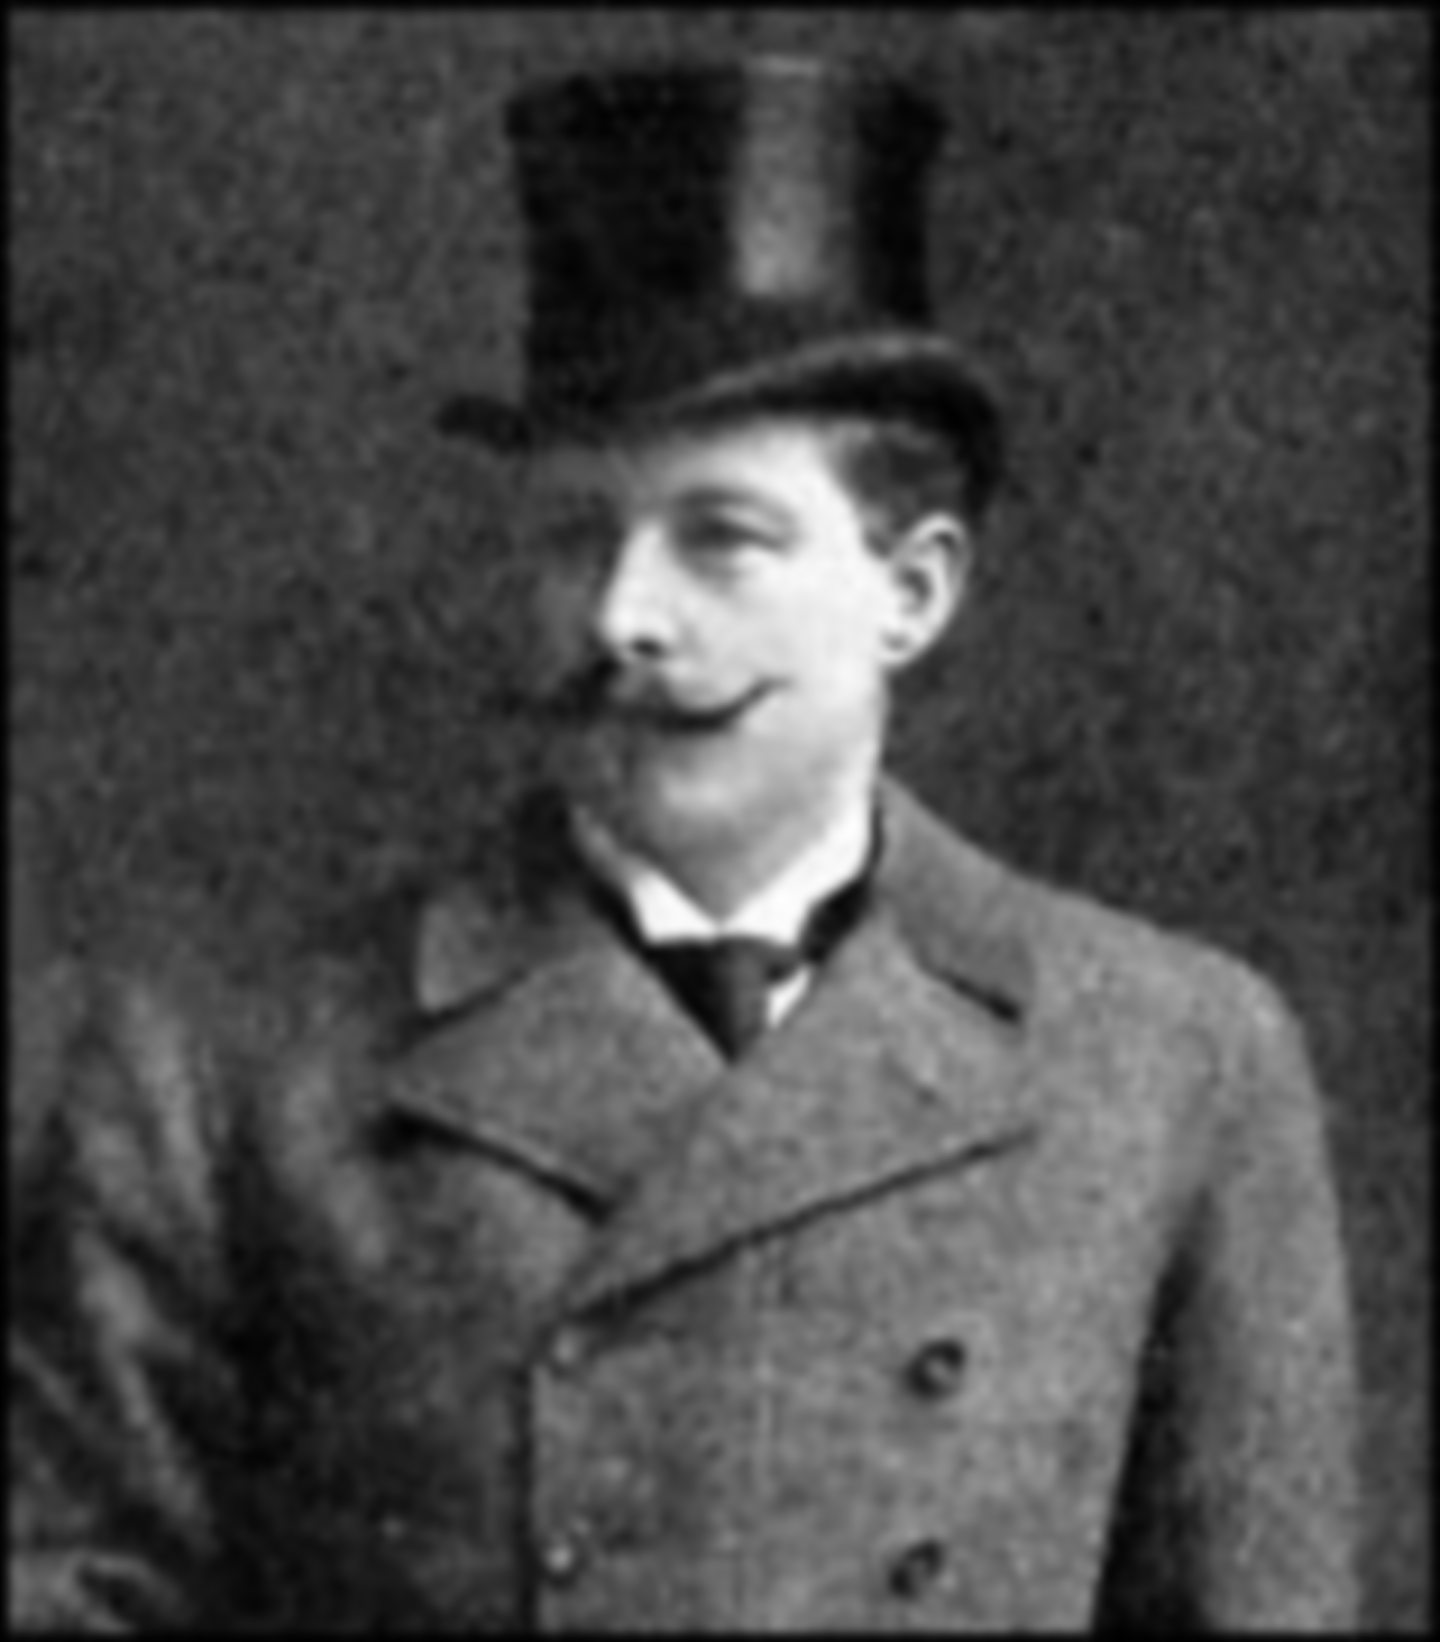 Sir Cosmo Duff-Gordon and his wife have been widely criticized following the tragedy.